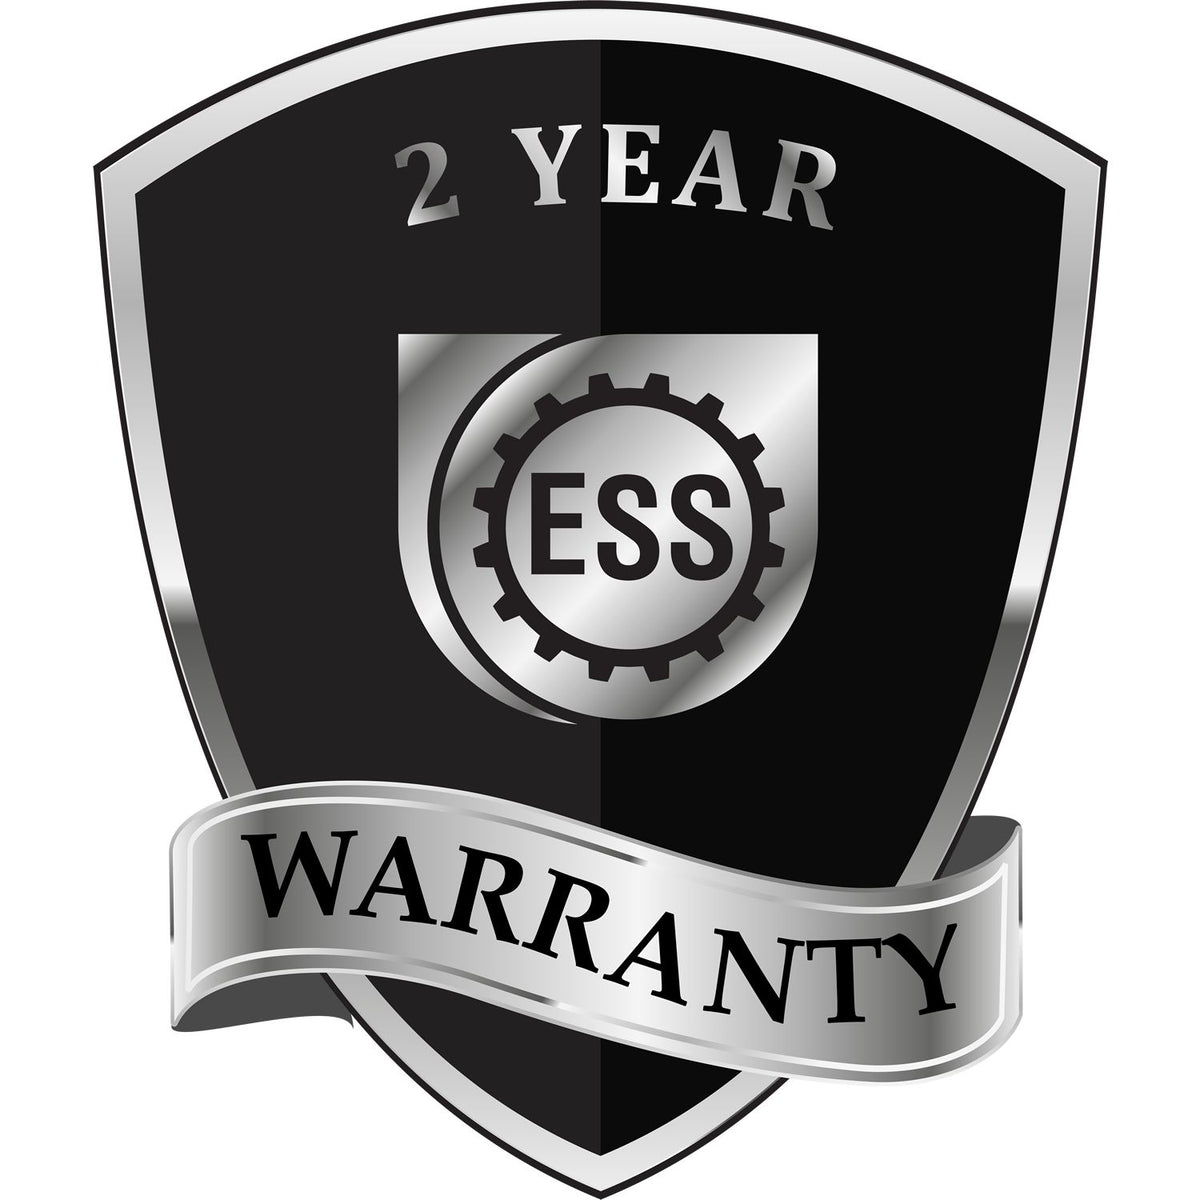 A badge or emblem showing a warranty icon for the Heavy Duty Cast Iron Connecticut Architect Embosser